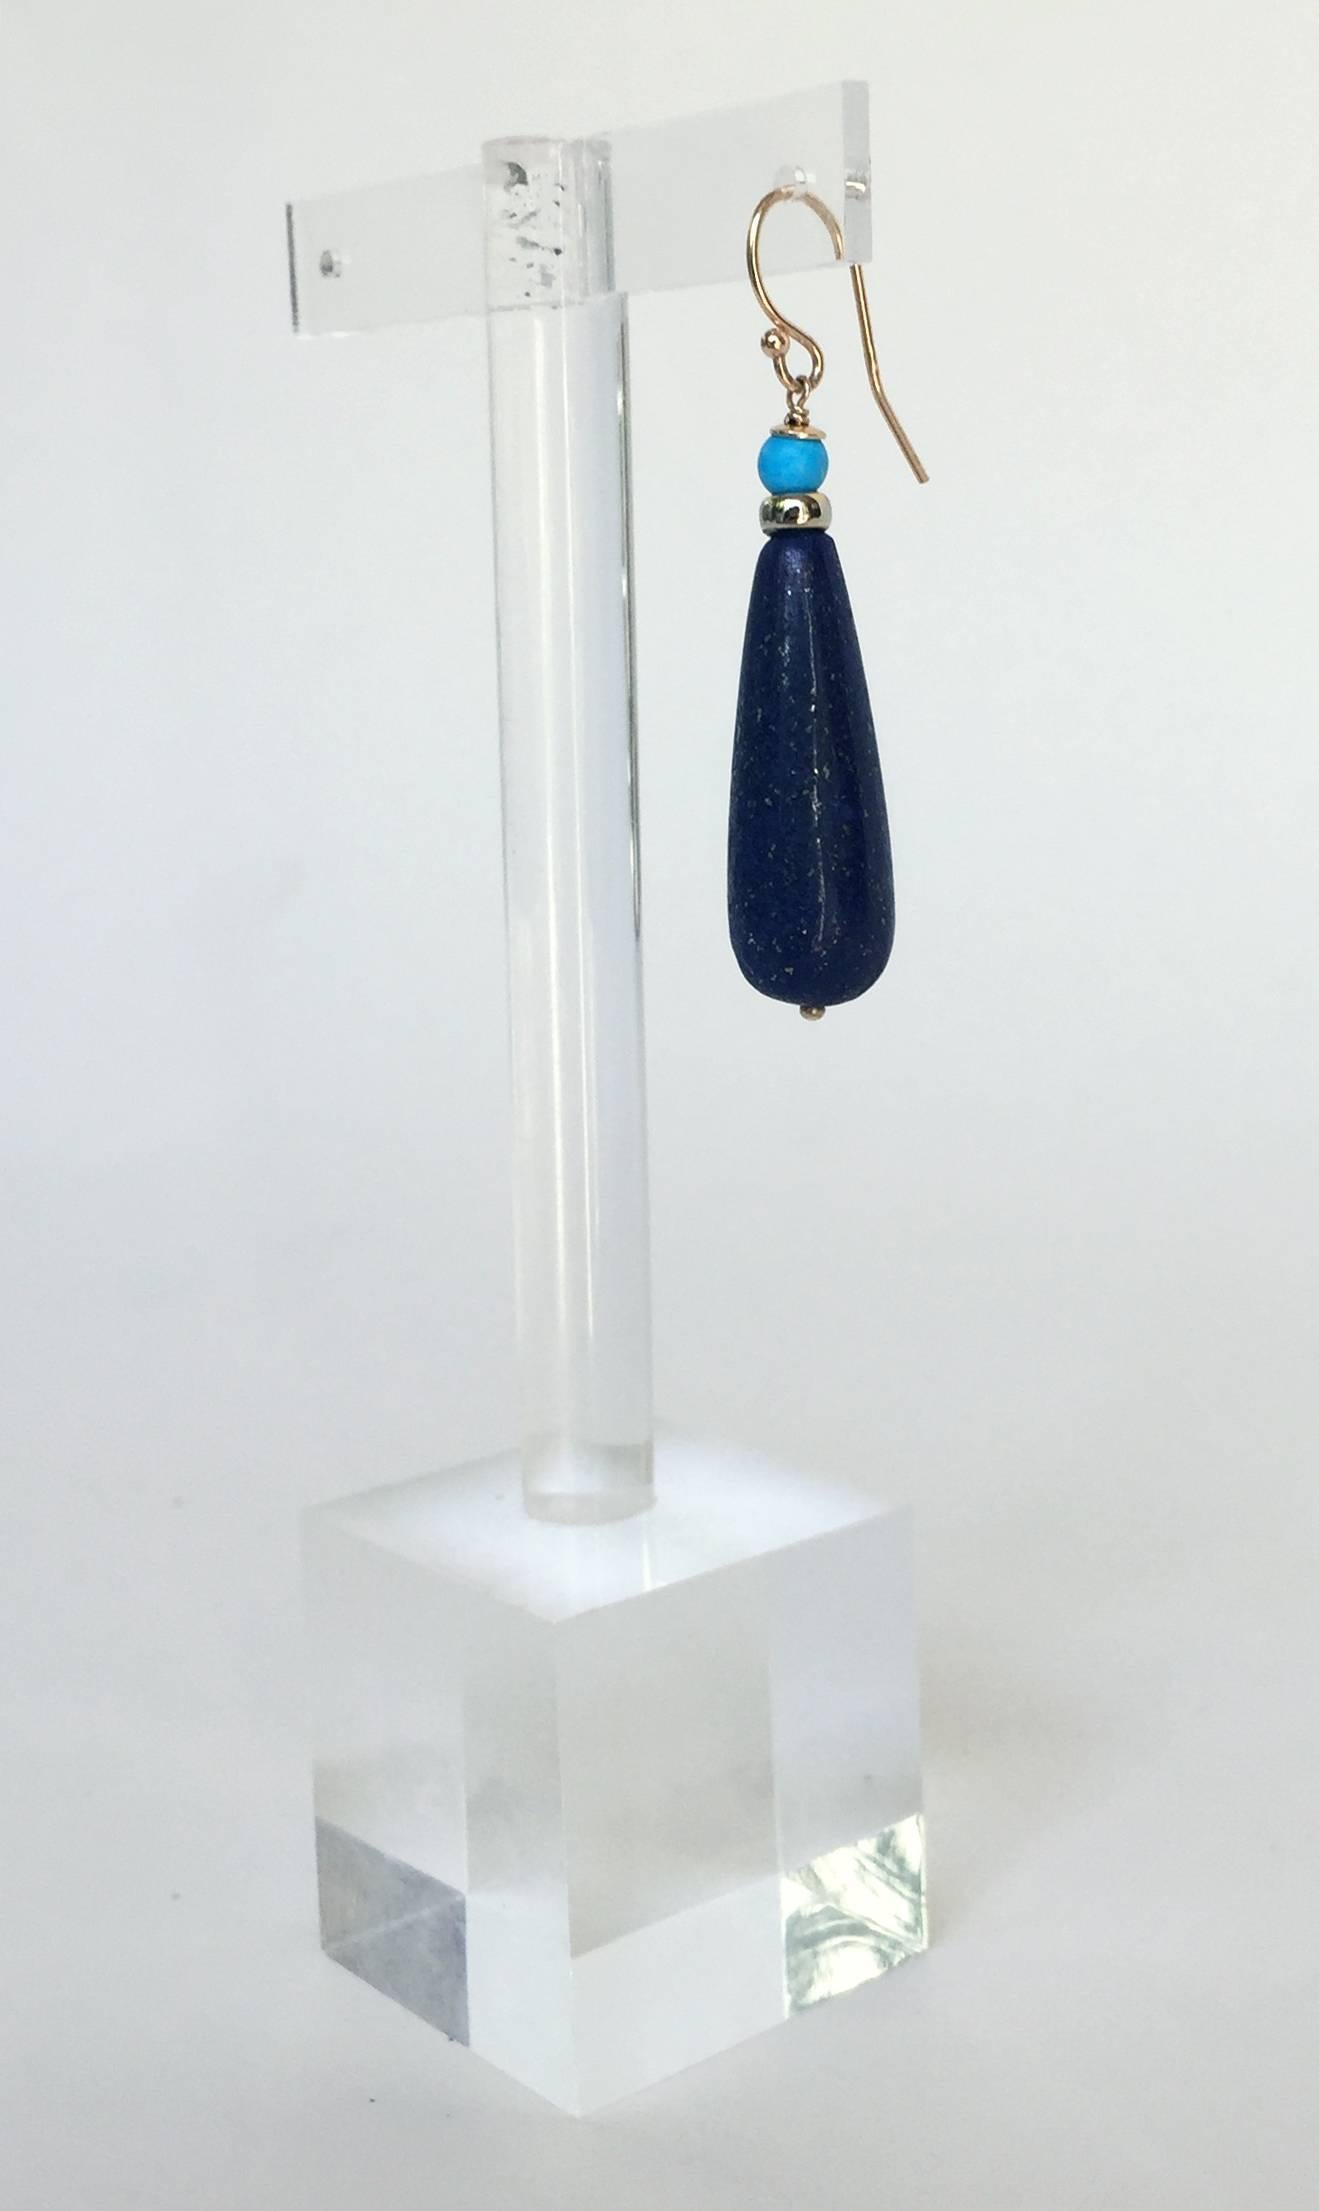 These elegant earrings showcase solid lapis lazuli drop beads. They are accented by 14K yellow gold and turquoise beads, bringing out the rich blue of the lapis lazuli . This composition is held by 14K yellow gold hooks, completing a Marina J